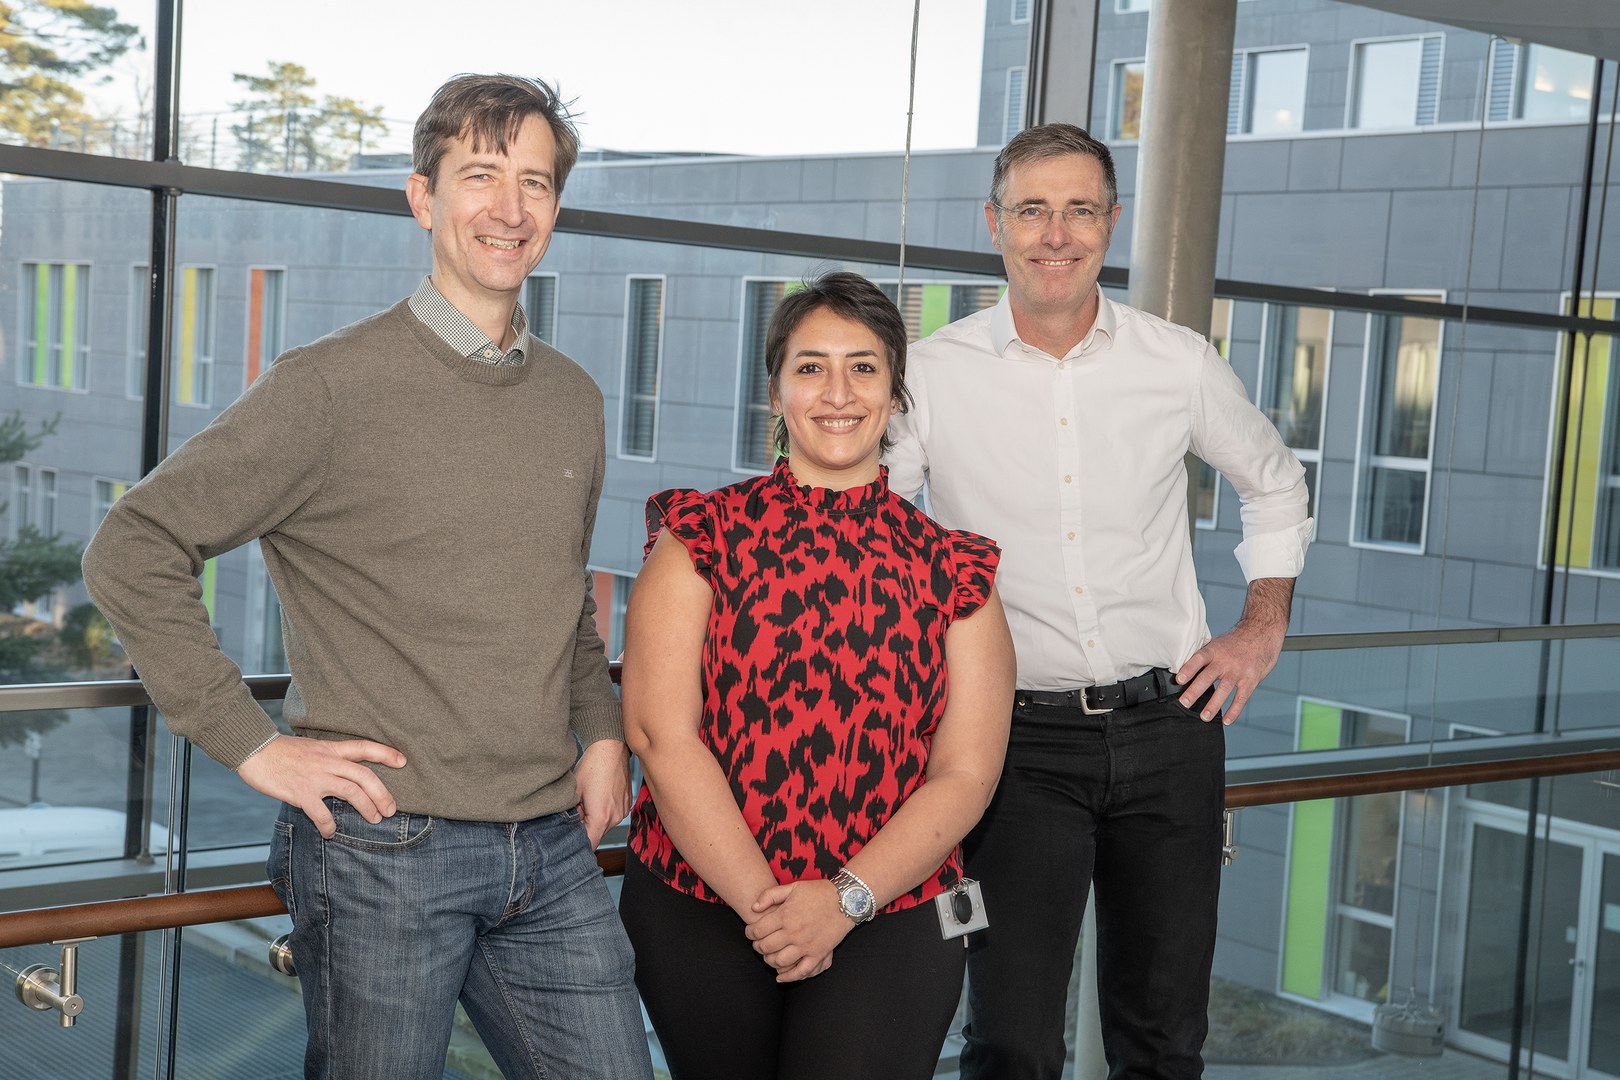 New insights in epilsepsy research & optimization of drug action: (from left) Prof. Dirk Dietrich, Dr. Amira Hanafy and Prof. Alf Lamprecht use a new analytical method to get to the bottom of leaks in the blood-brain barrier.